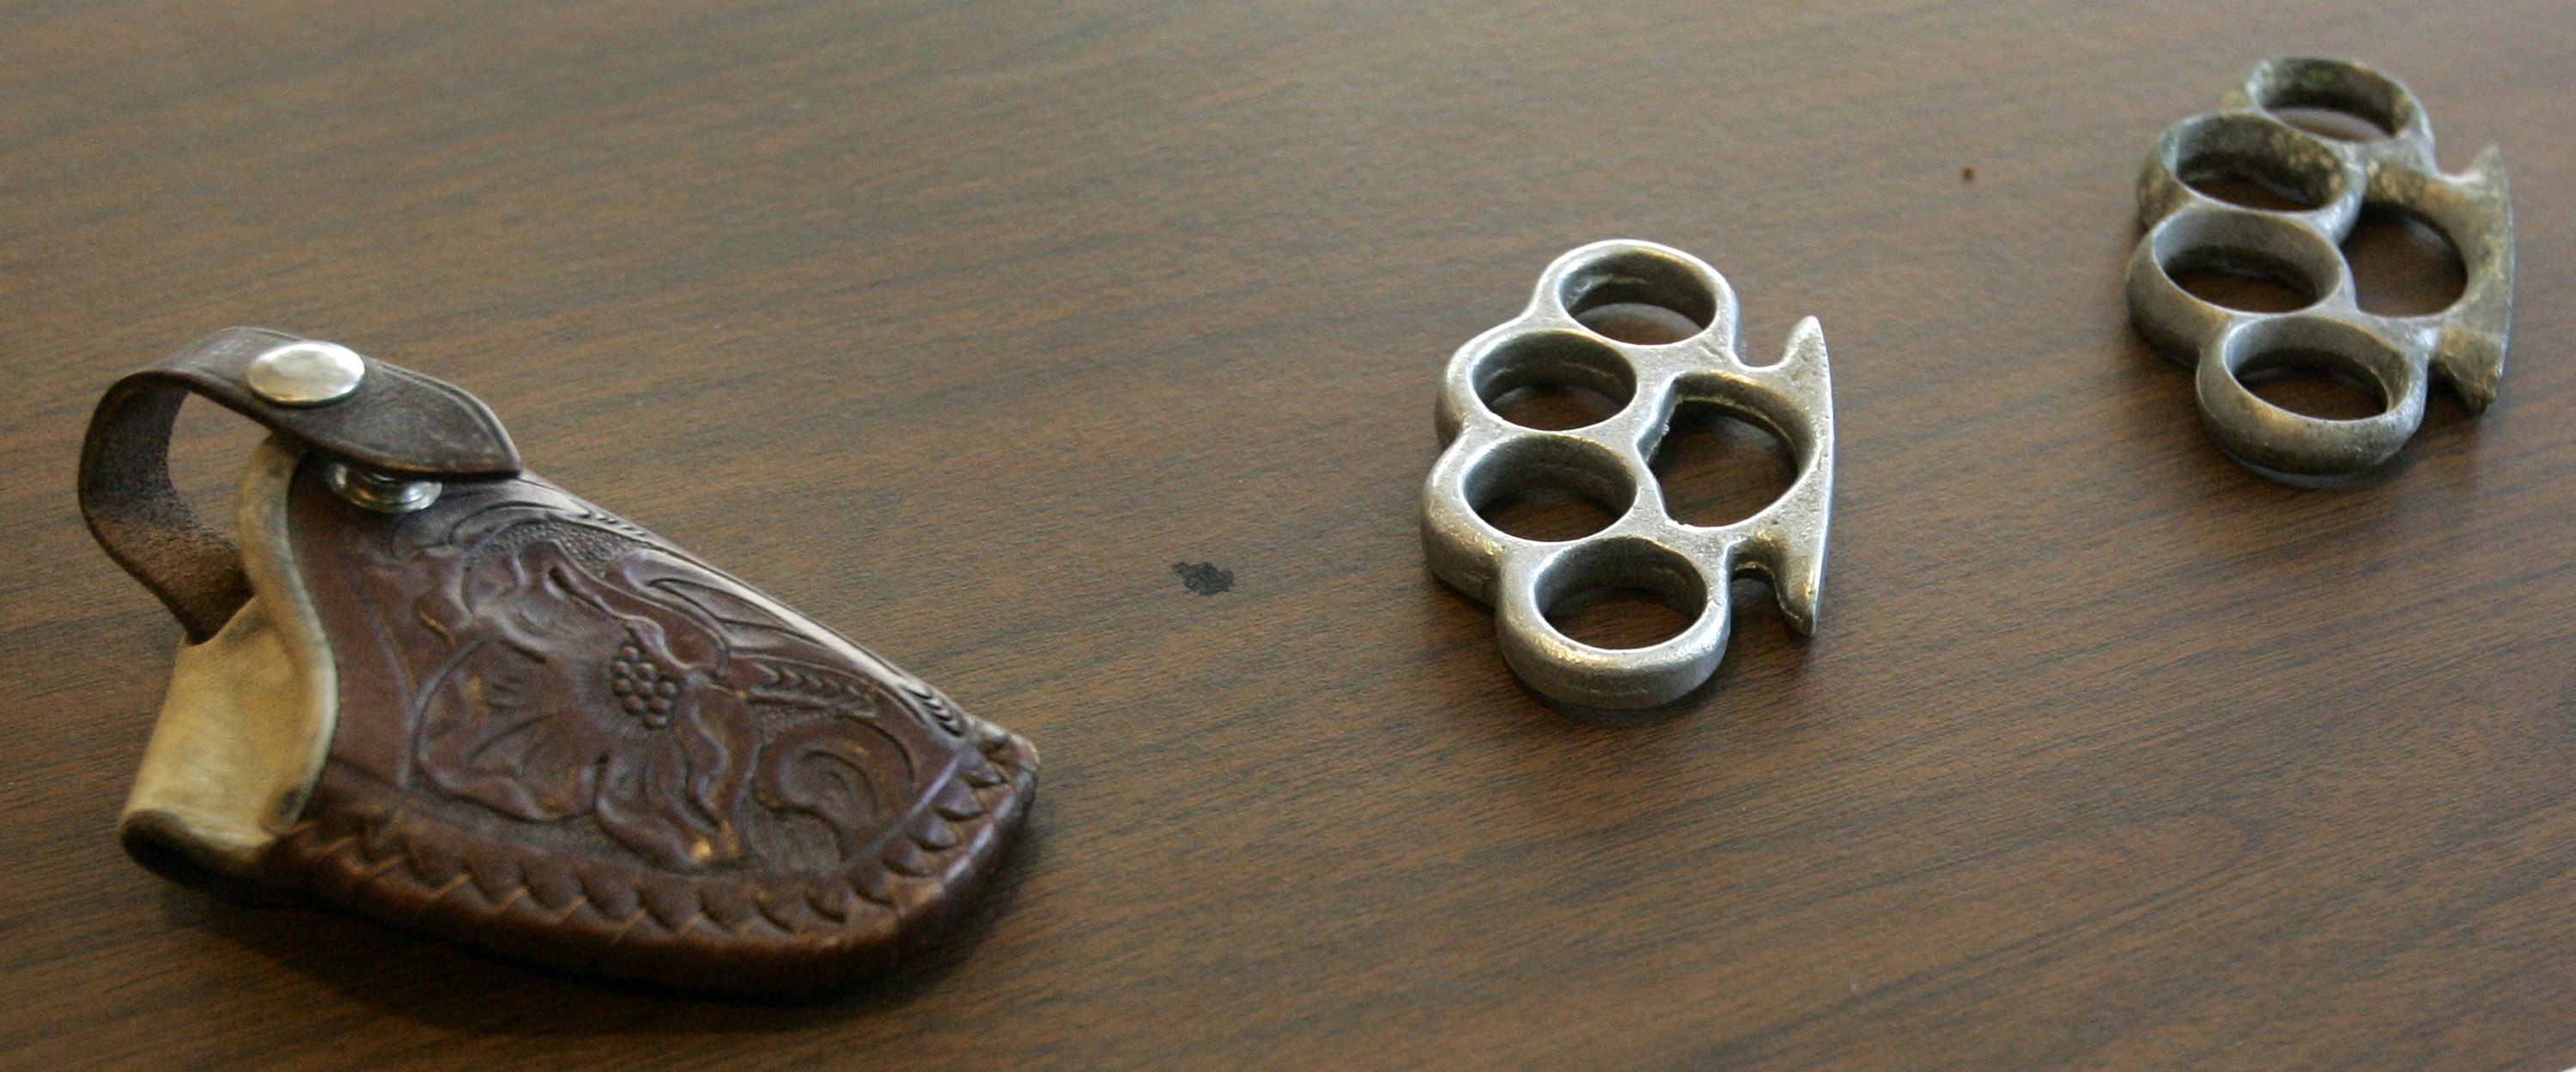 Texas Gov. Abbott signs law lifting ban on brass knuckles, kitty